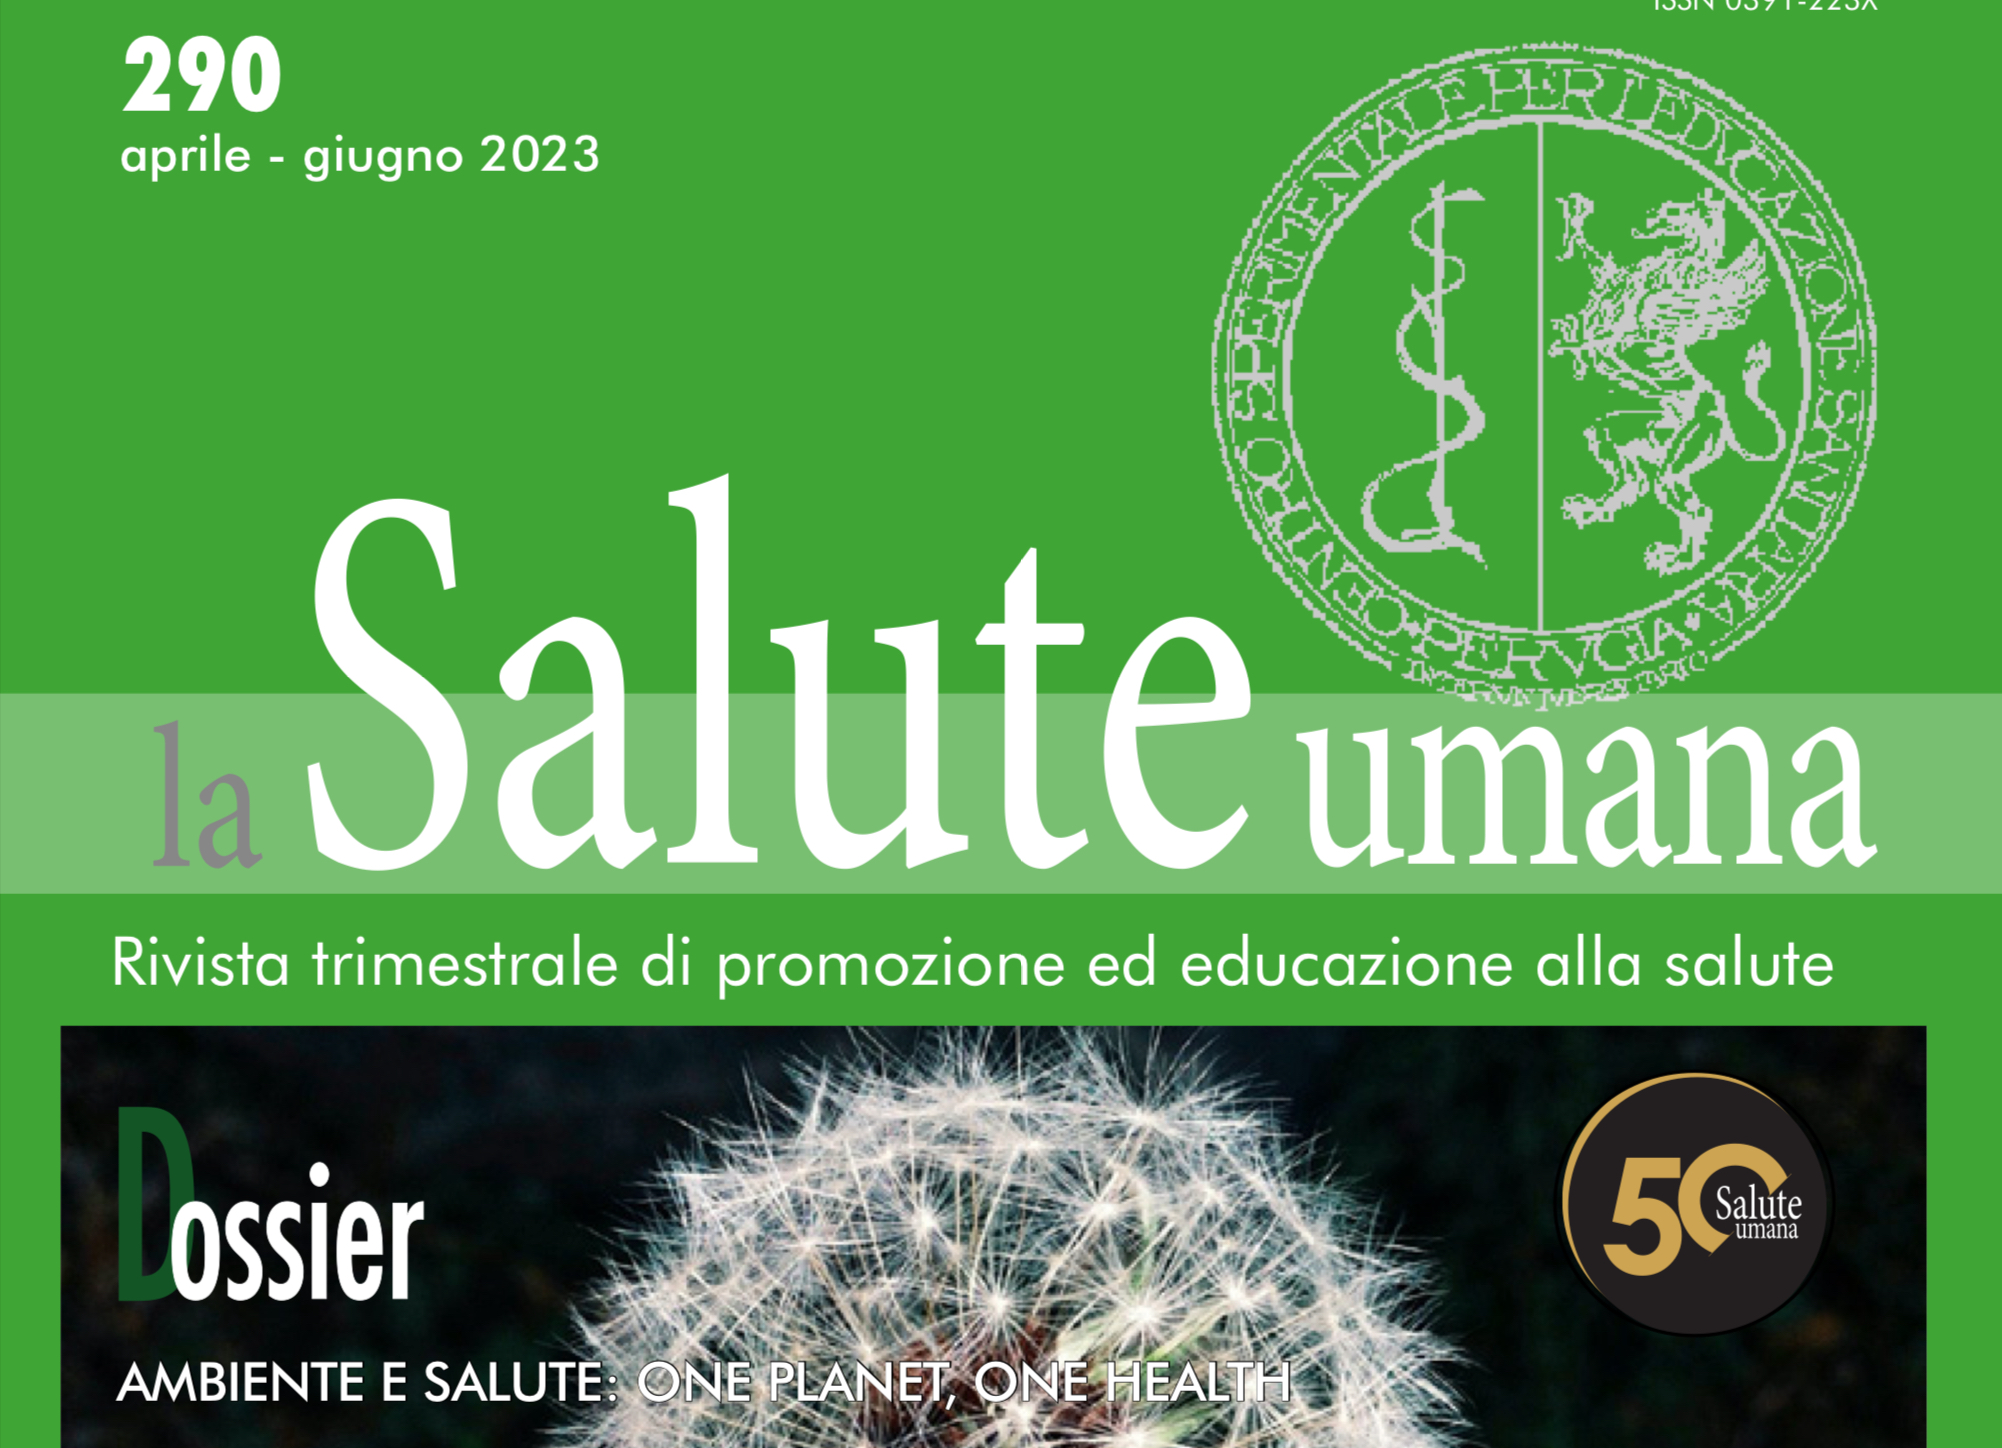 Ambiente e salute: one planet, one health